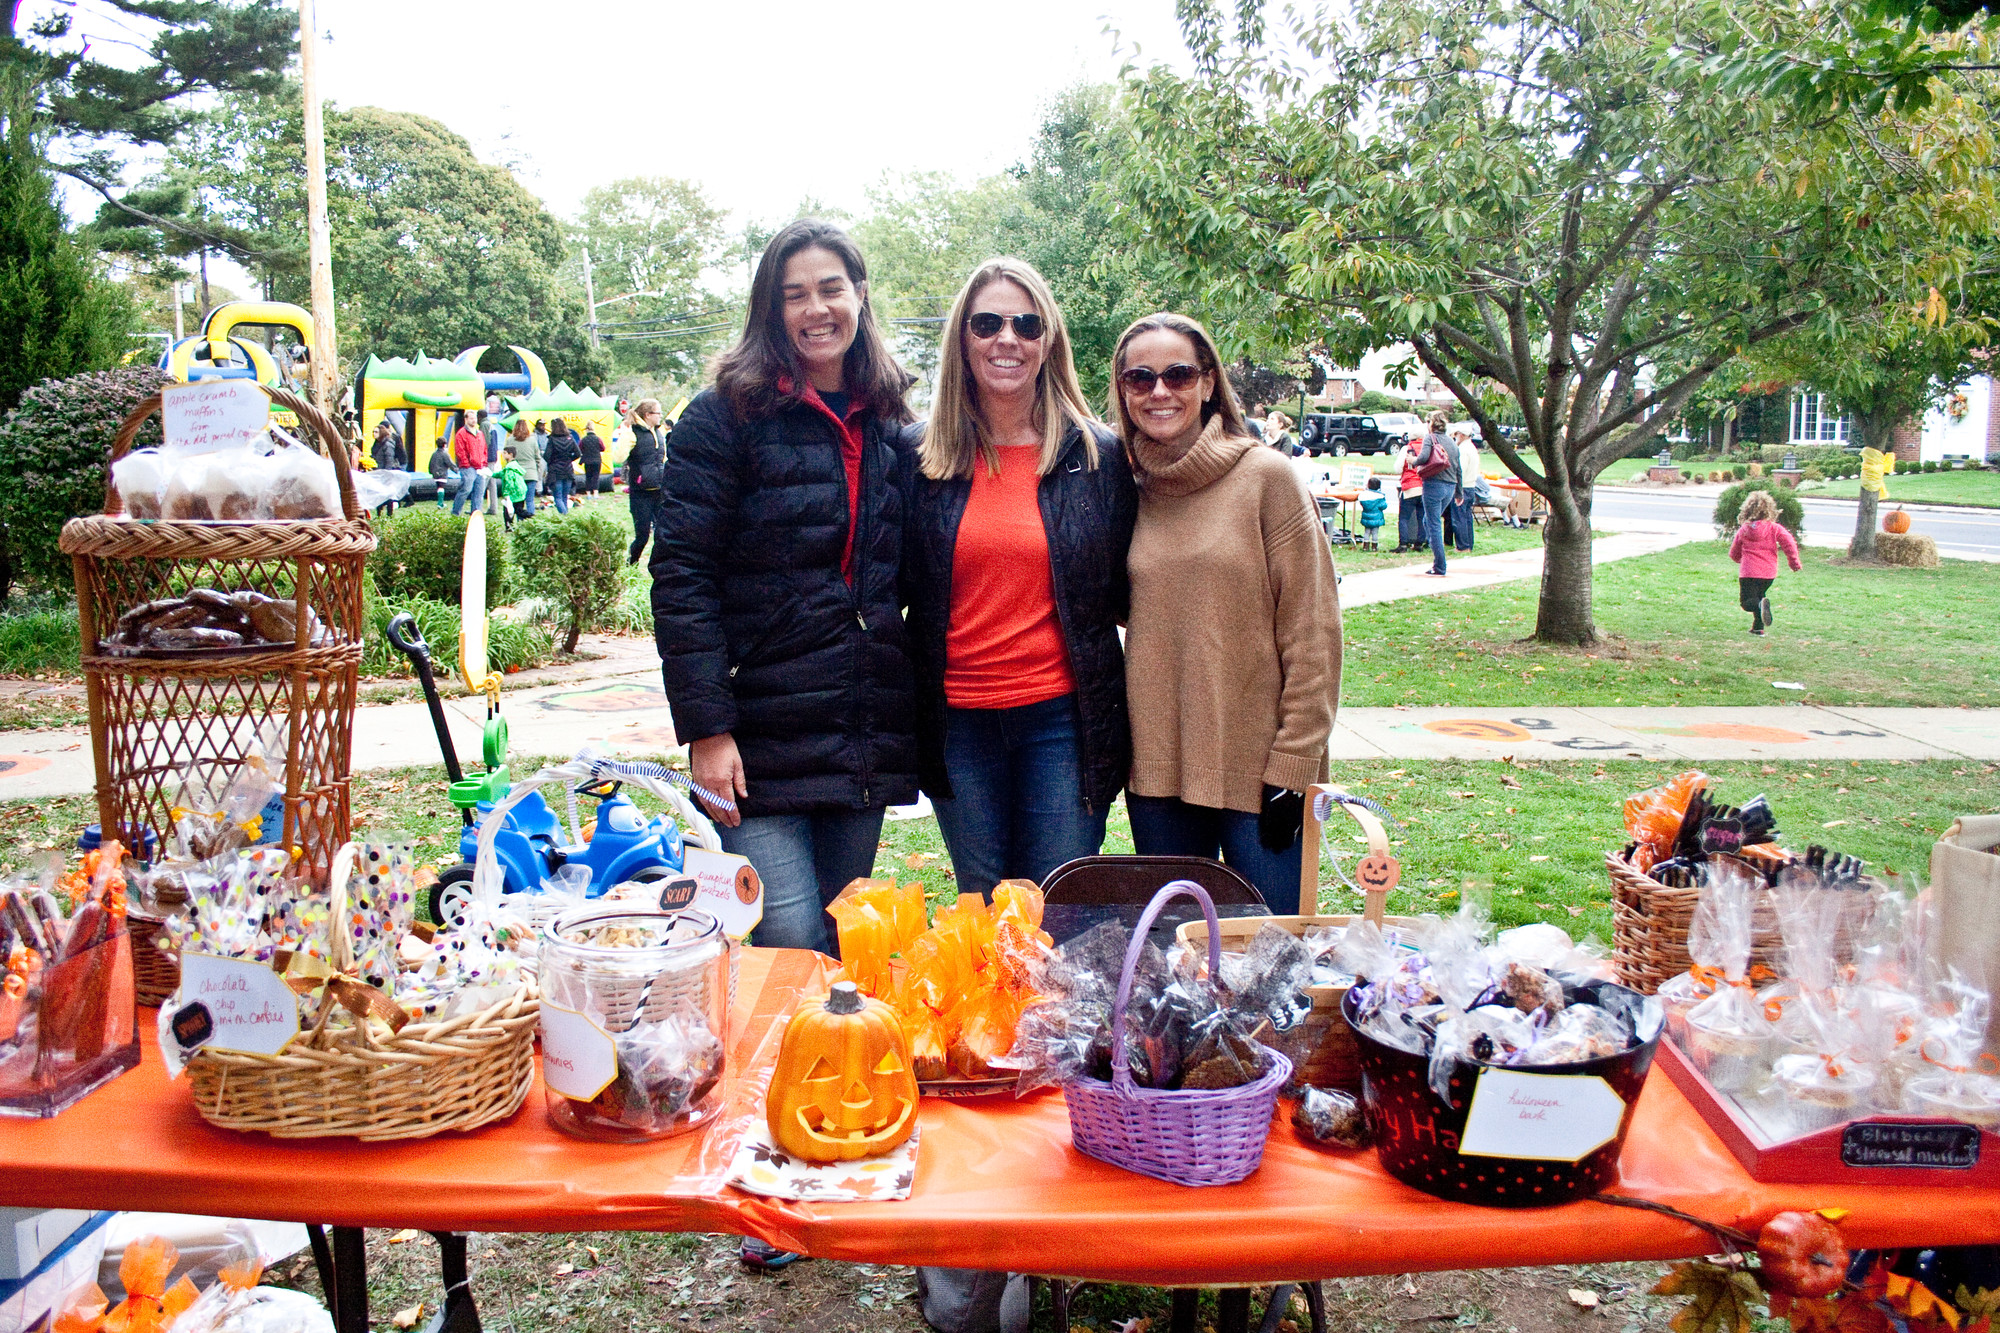 Volunteers Maureen Araneo, left, Kathy Hunter and Jessica Darcy worked at the sweets table.